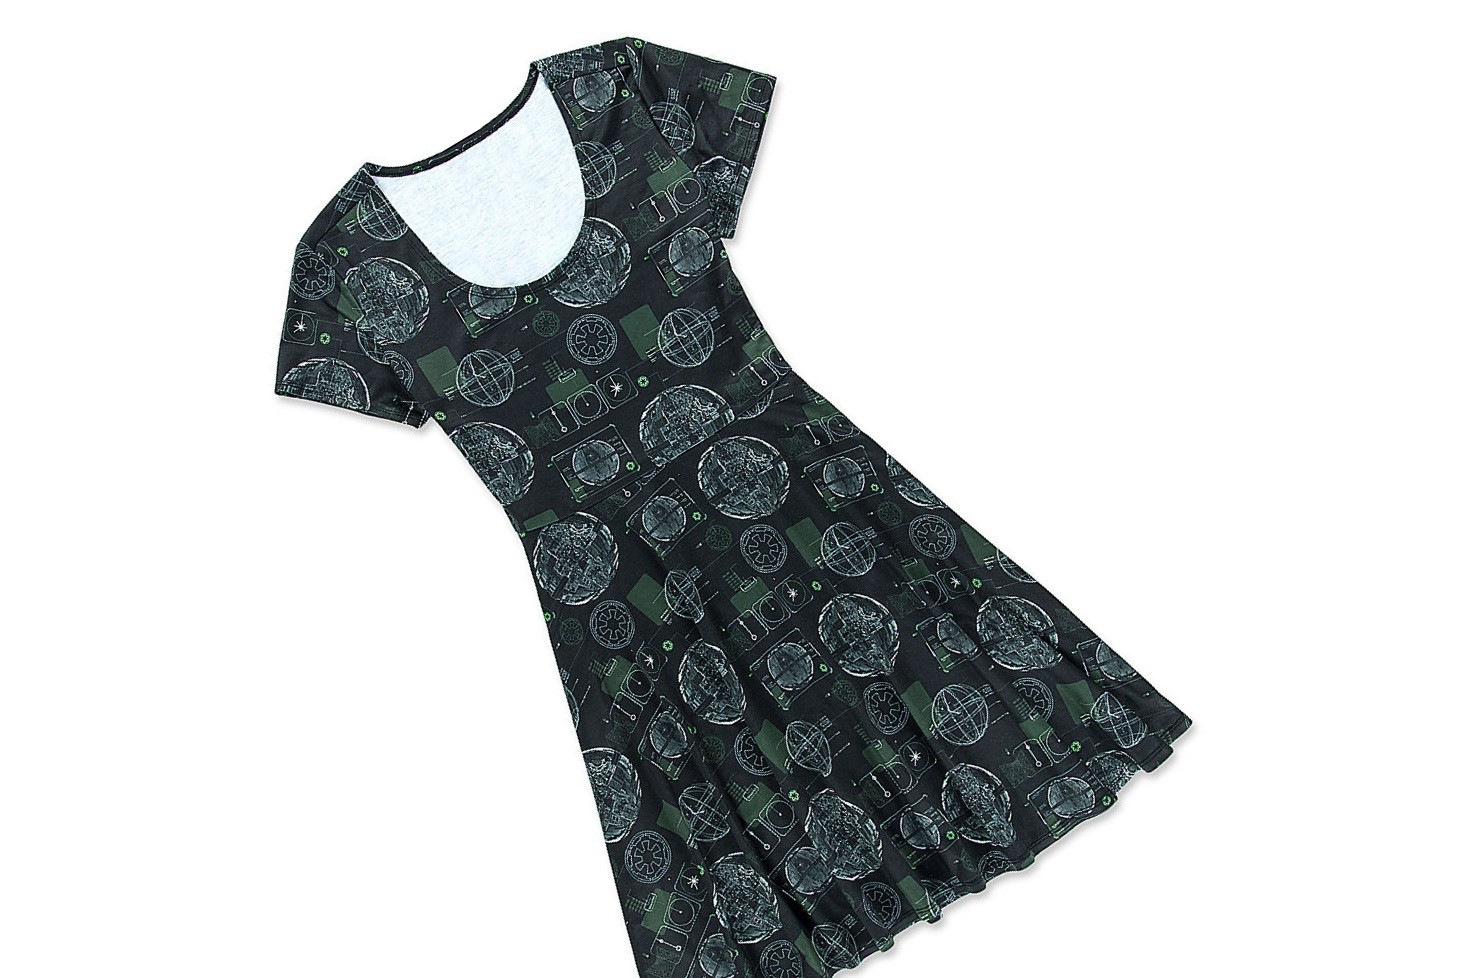 Disney Store - Her Universe Rogue One Death Star dress